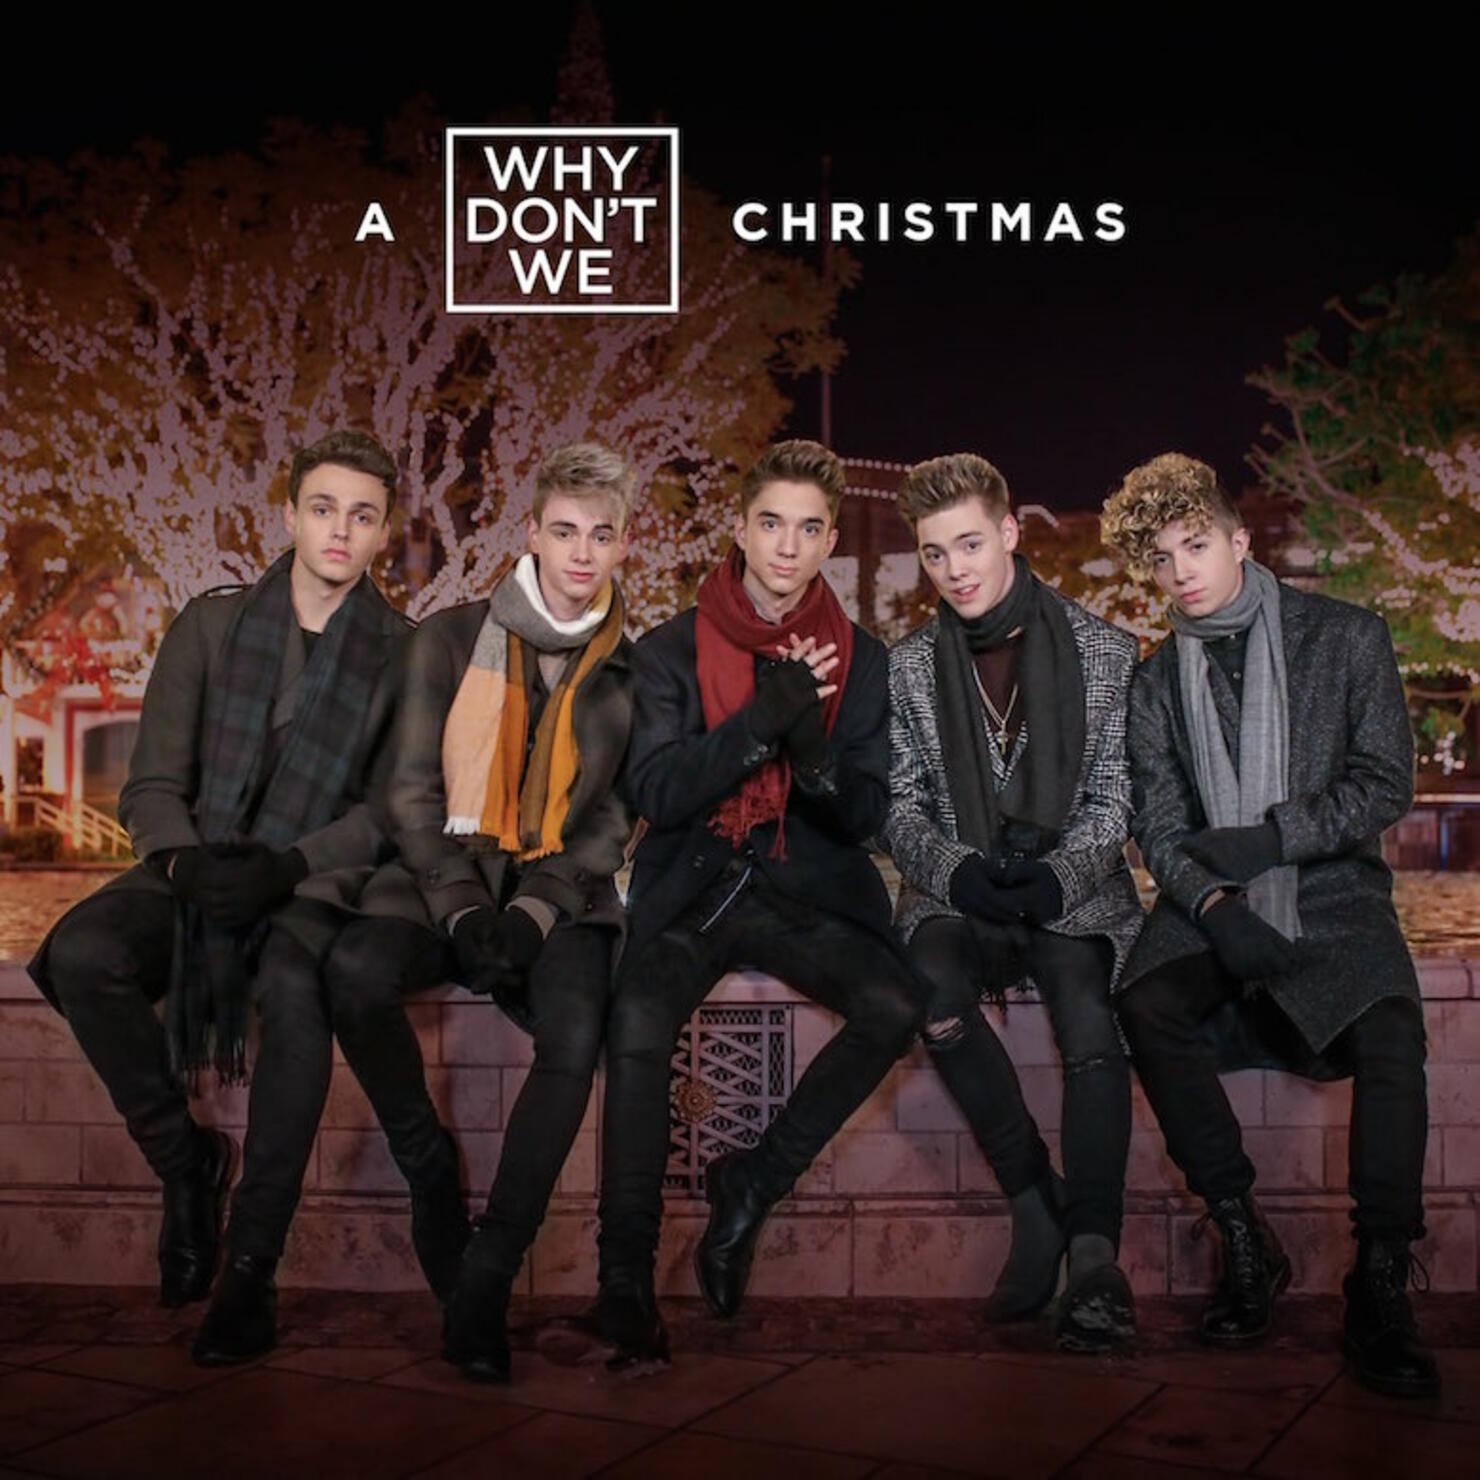 Why Don't We - 'A Why Don't We Christmas' EP